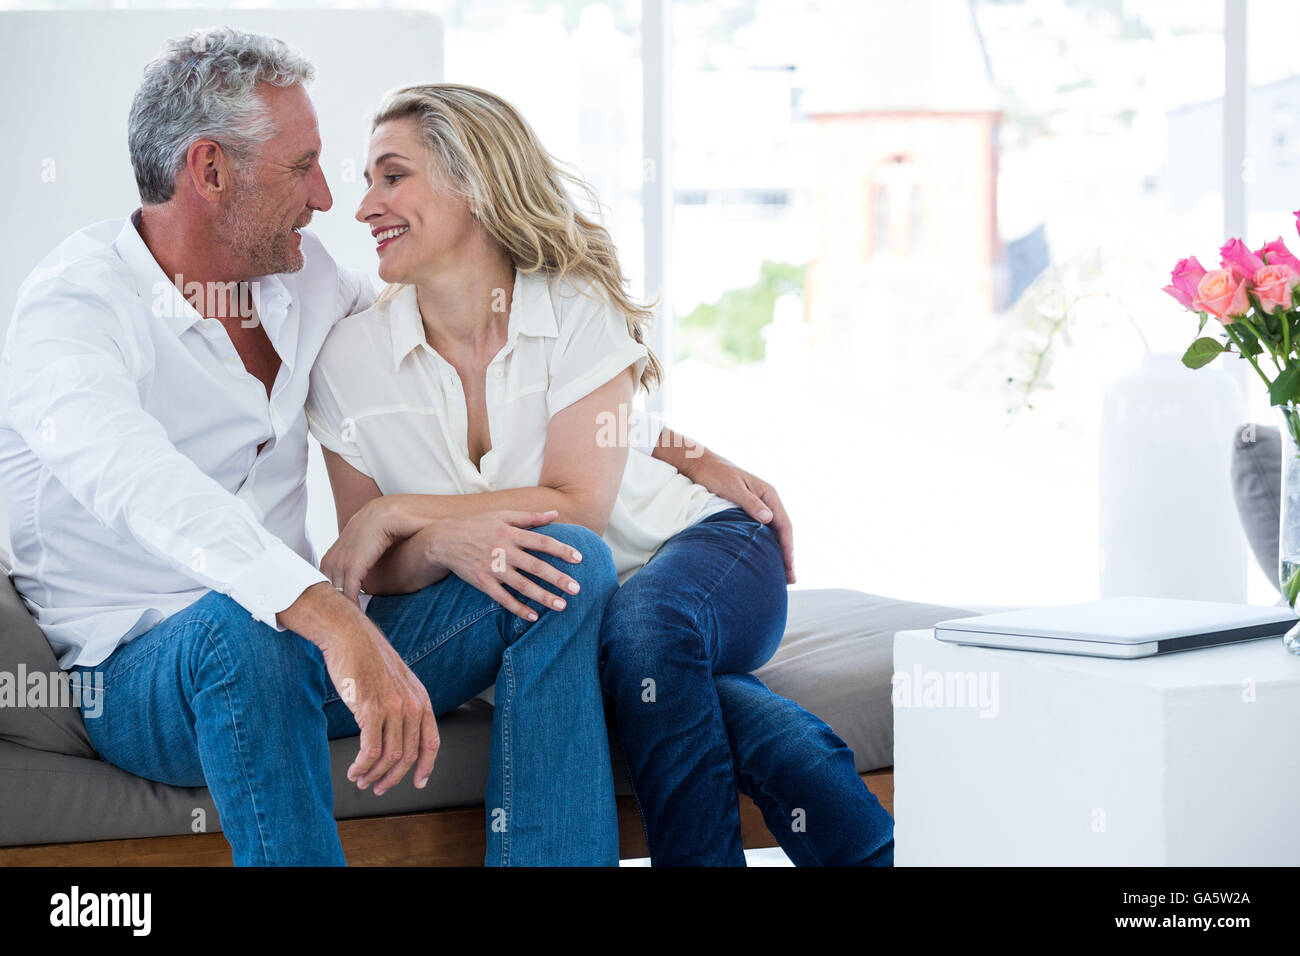 Romantic mature couple sitting face to face Stock Photo